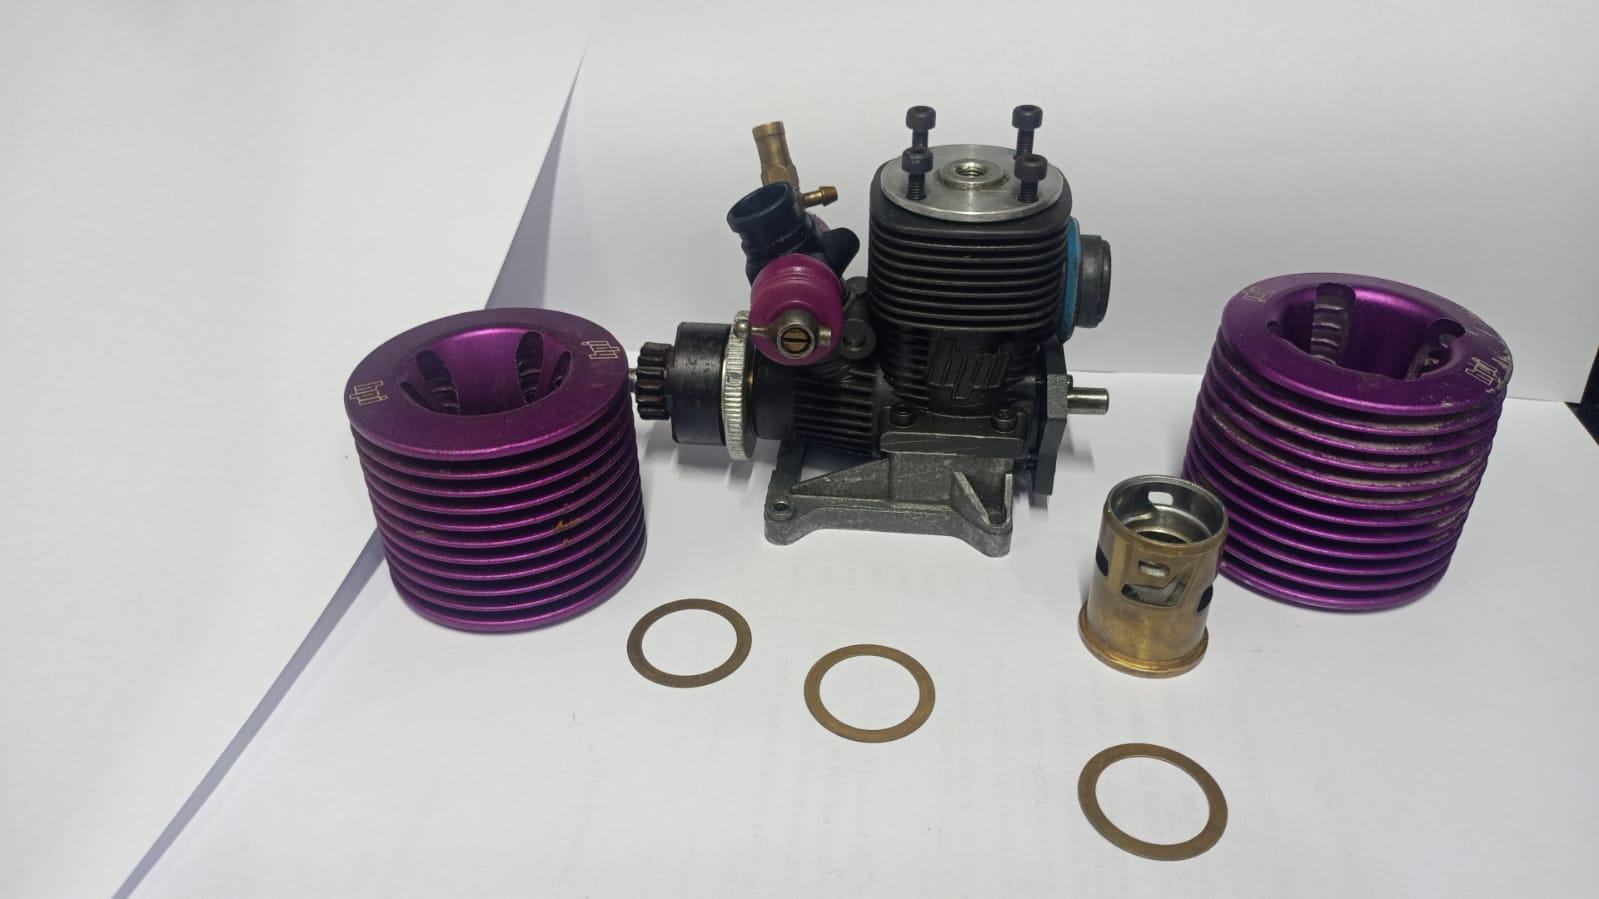 Hpi Racing Nitro Star  Engine Parts-Quality Pre Owned